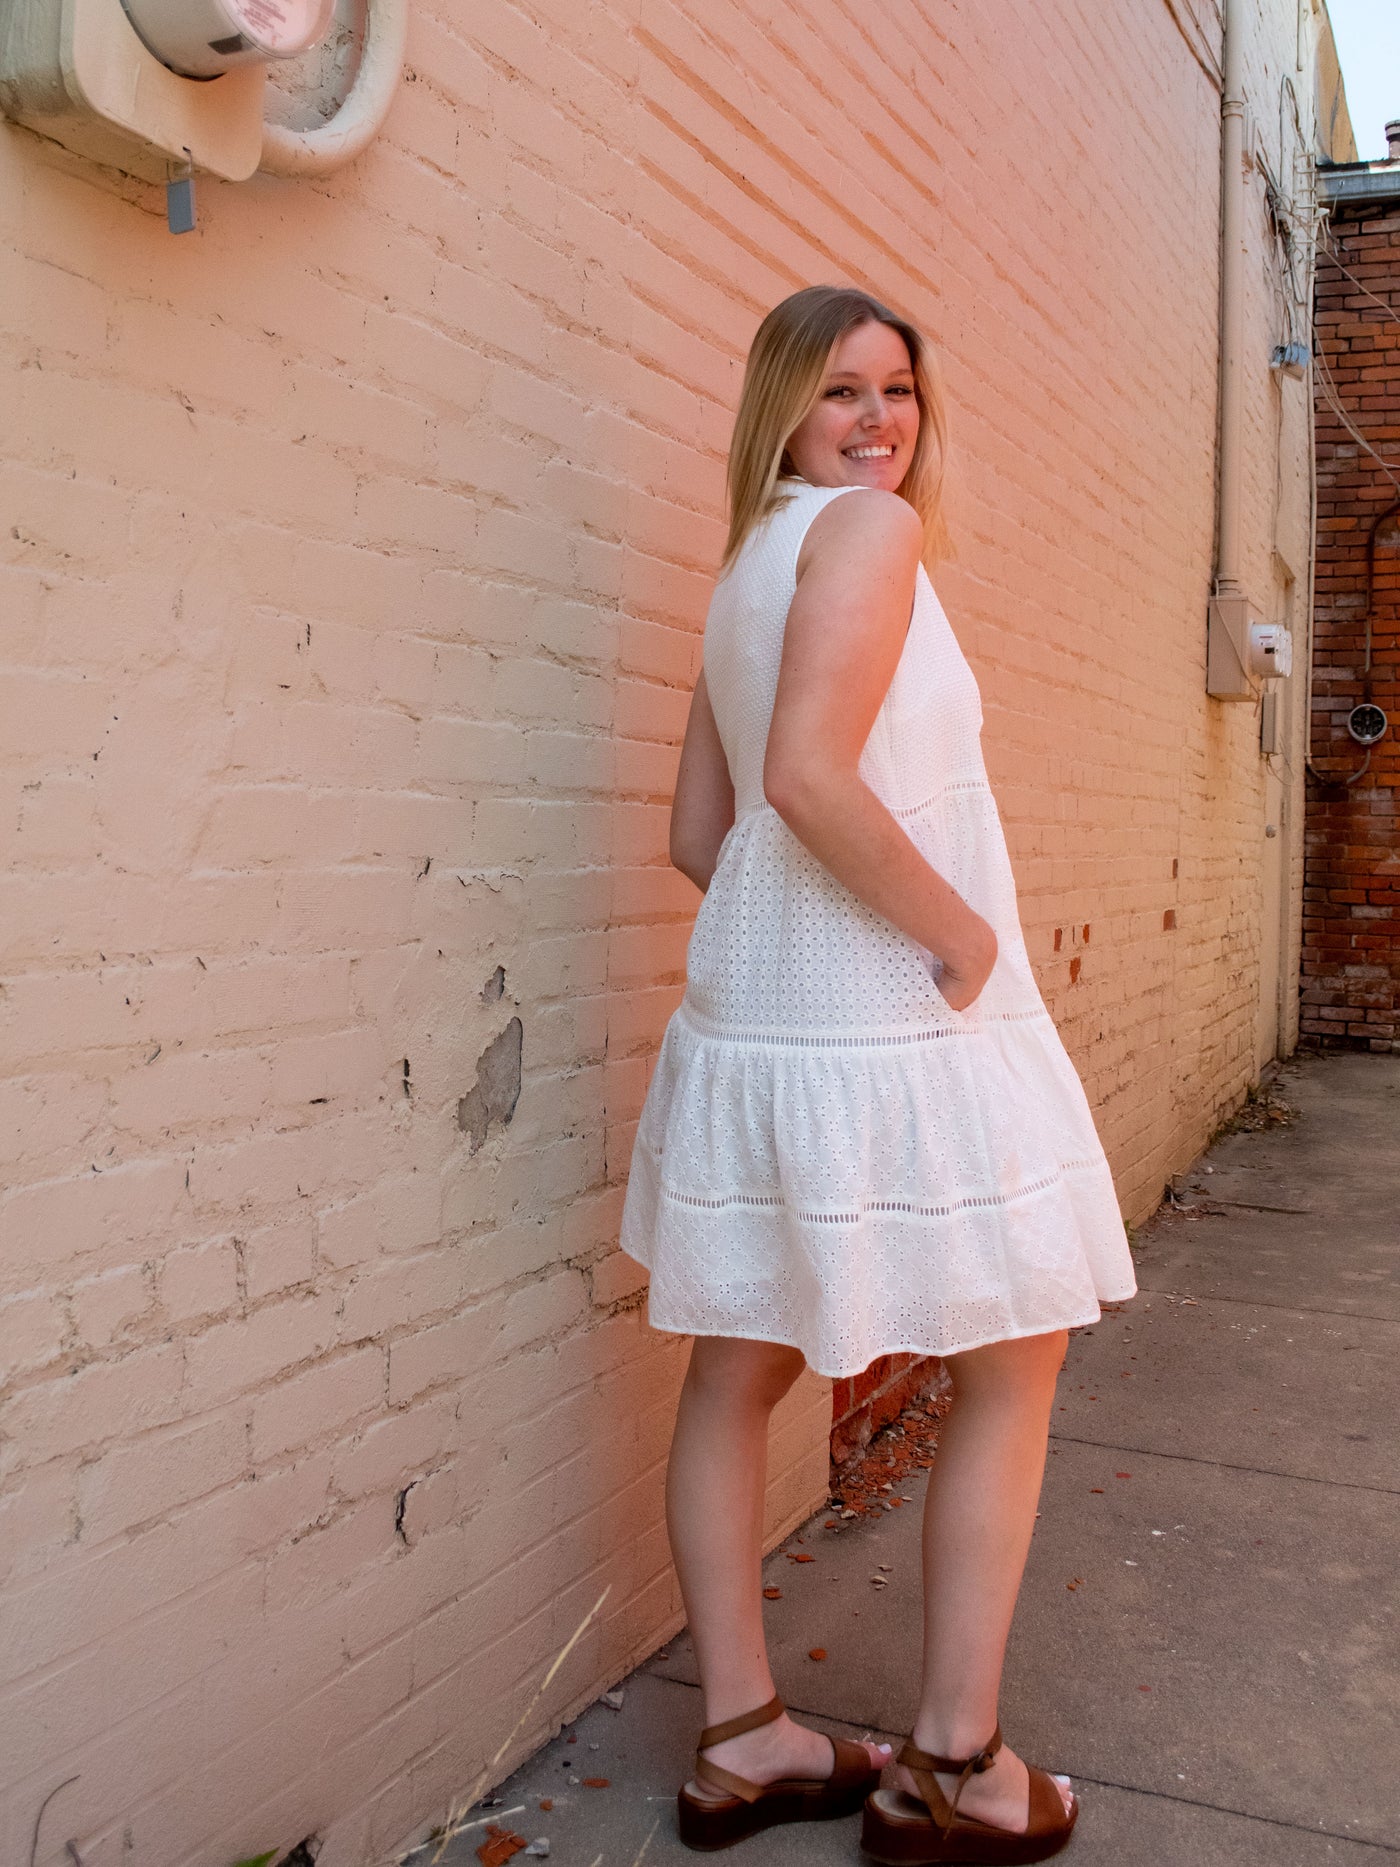 A model wearing a white empire waist eyelet dress and brown platform sandals.